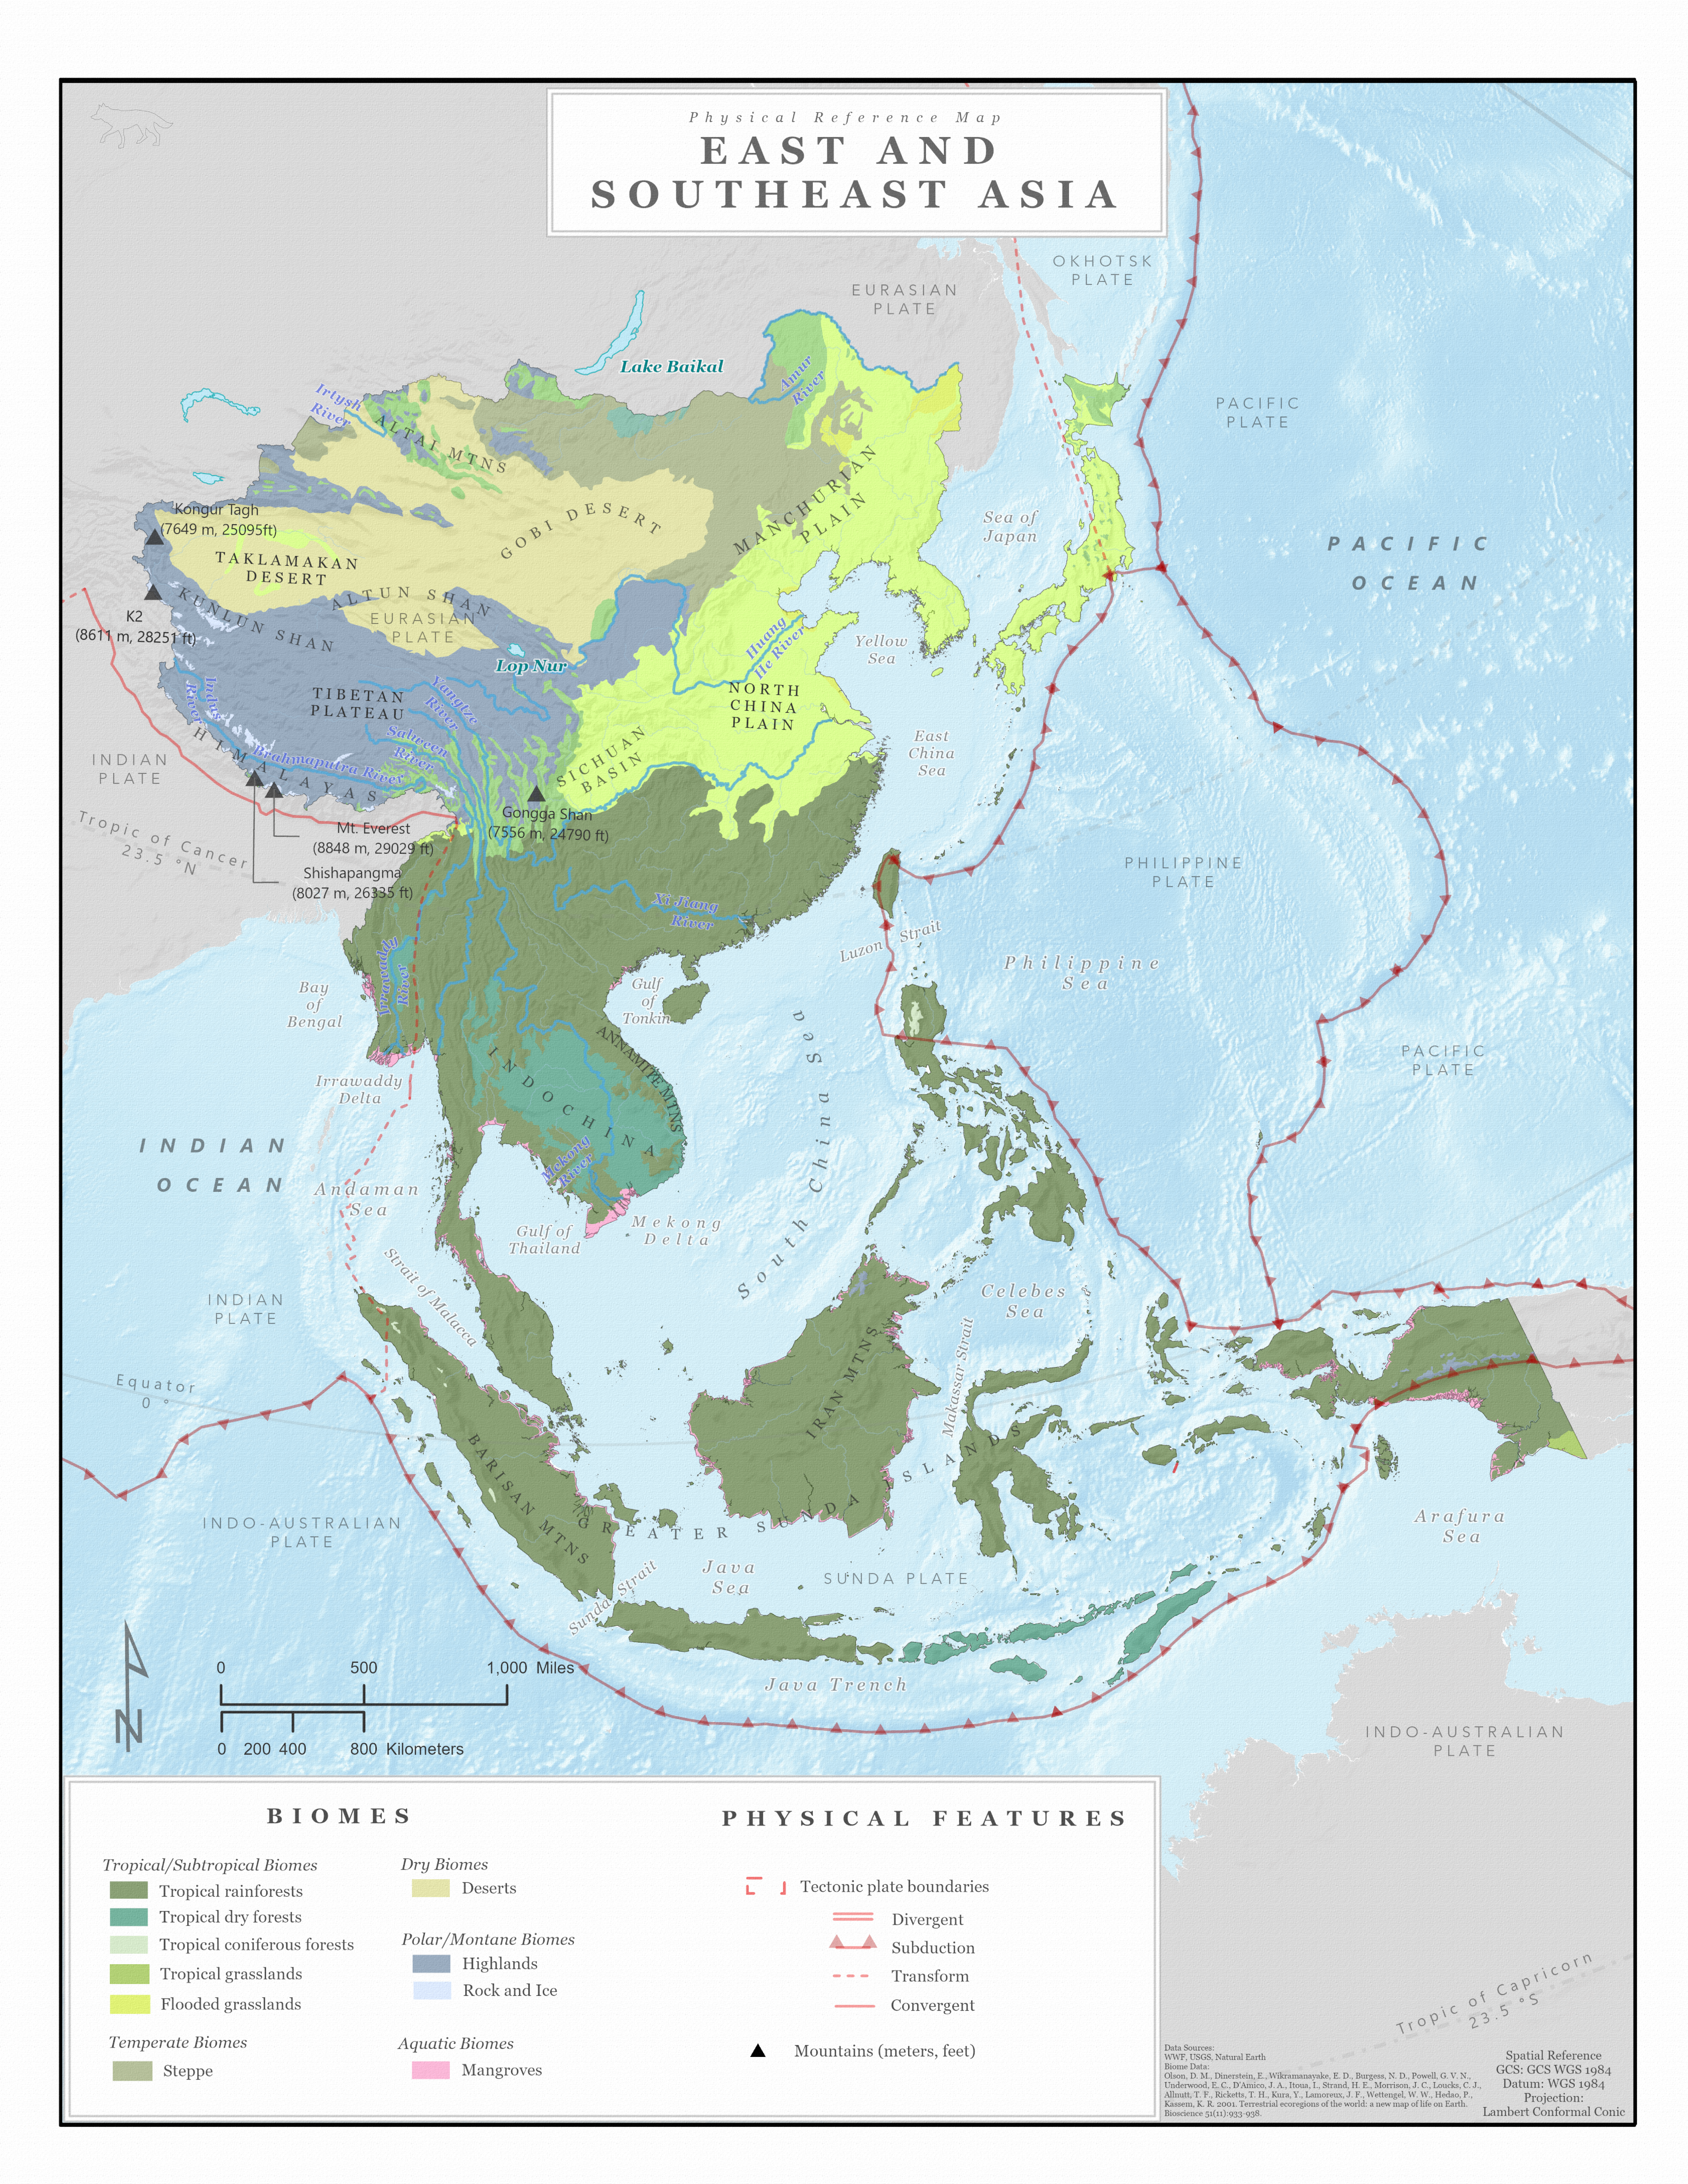 Biome and physical features map of East and Southeast Asia